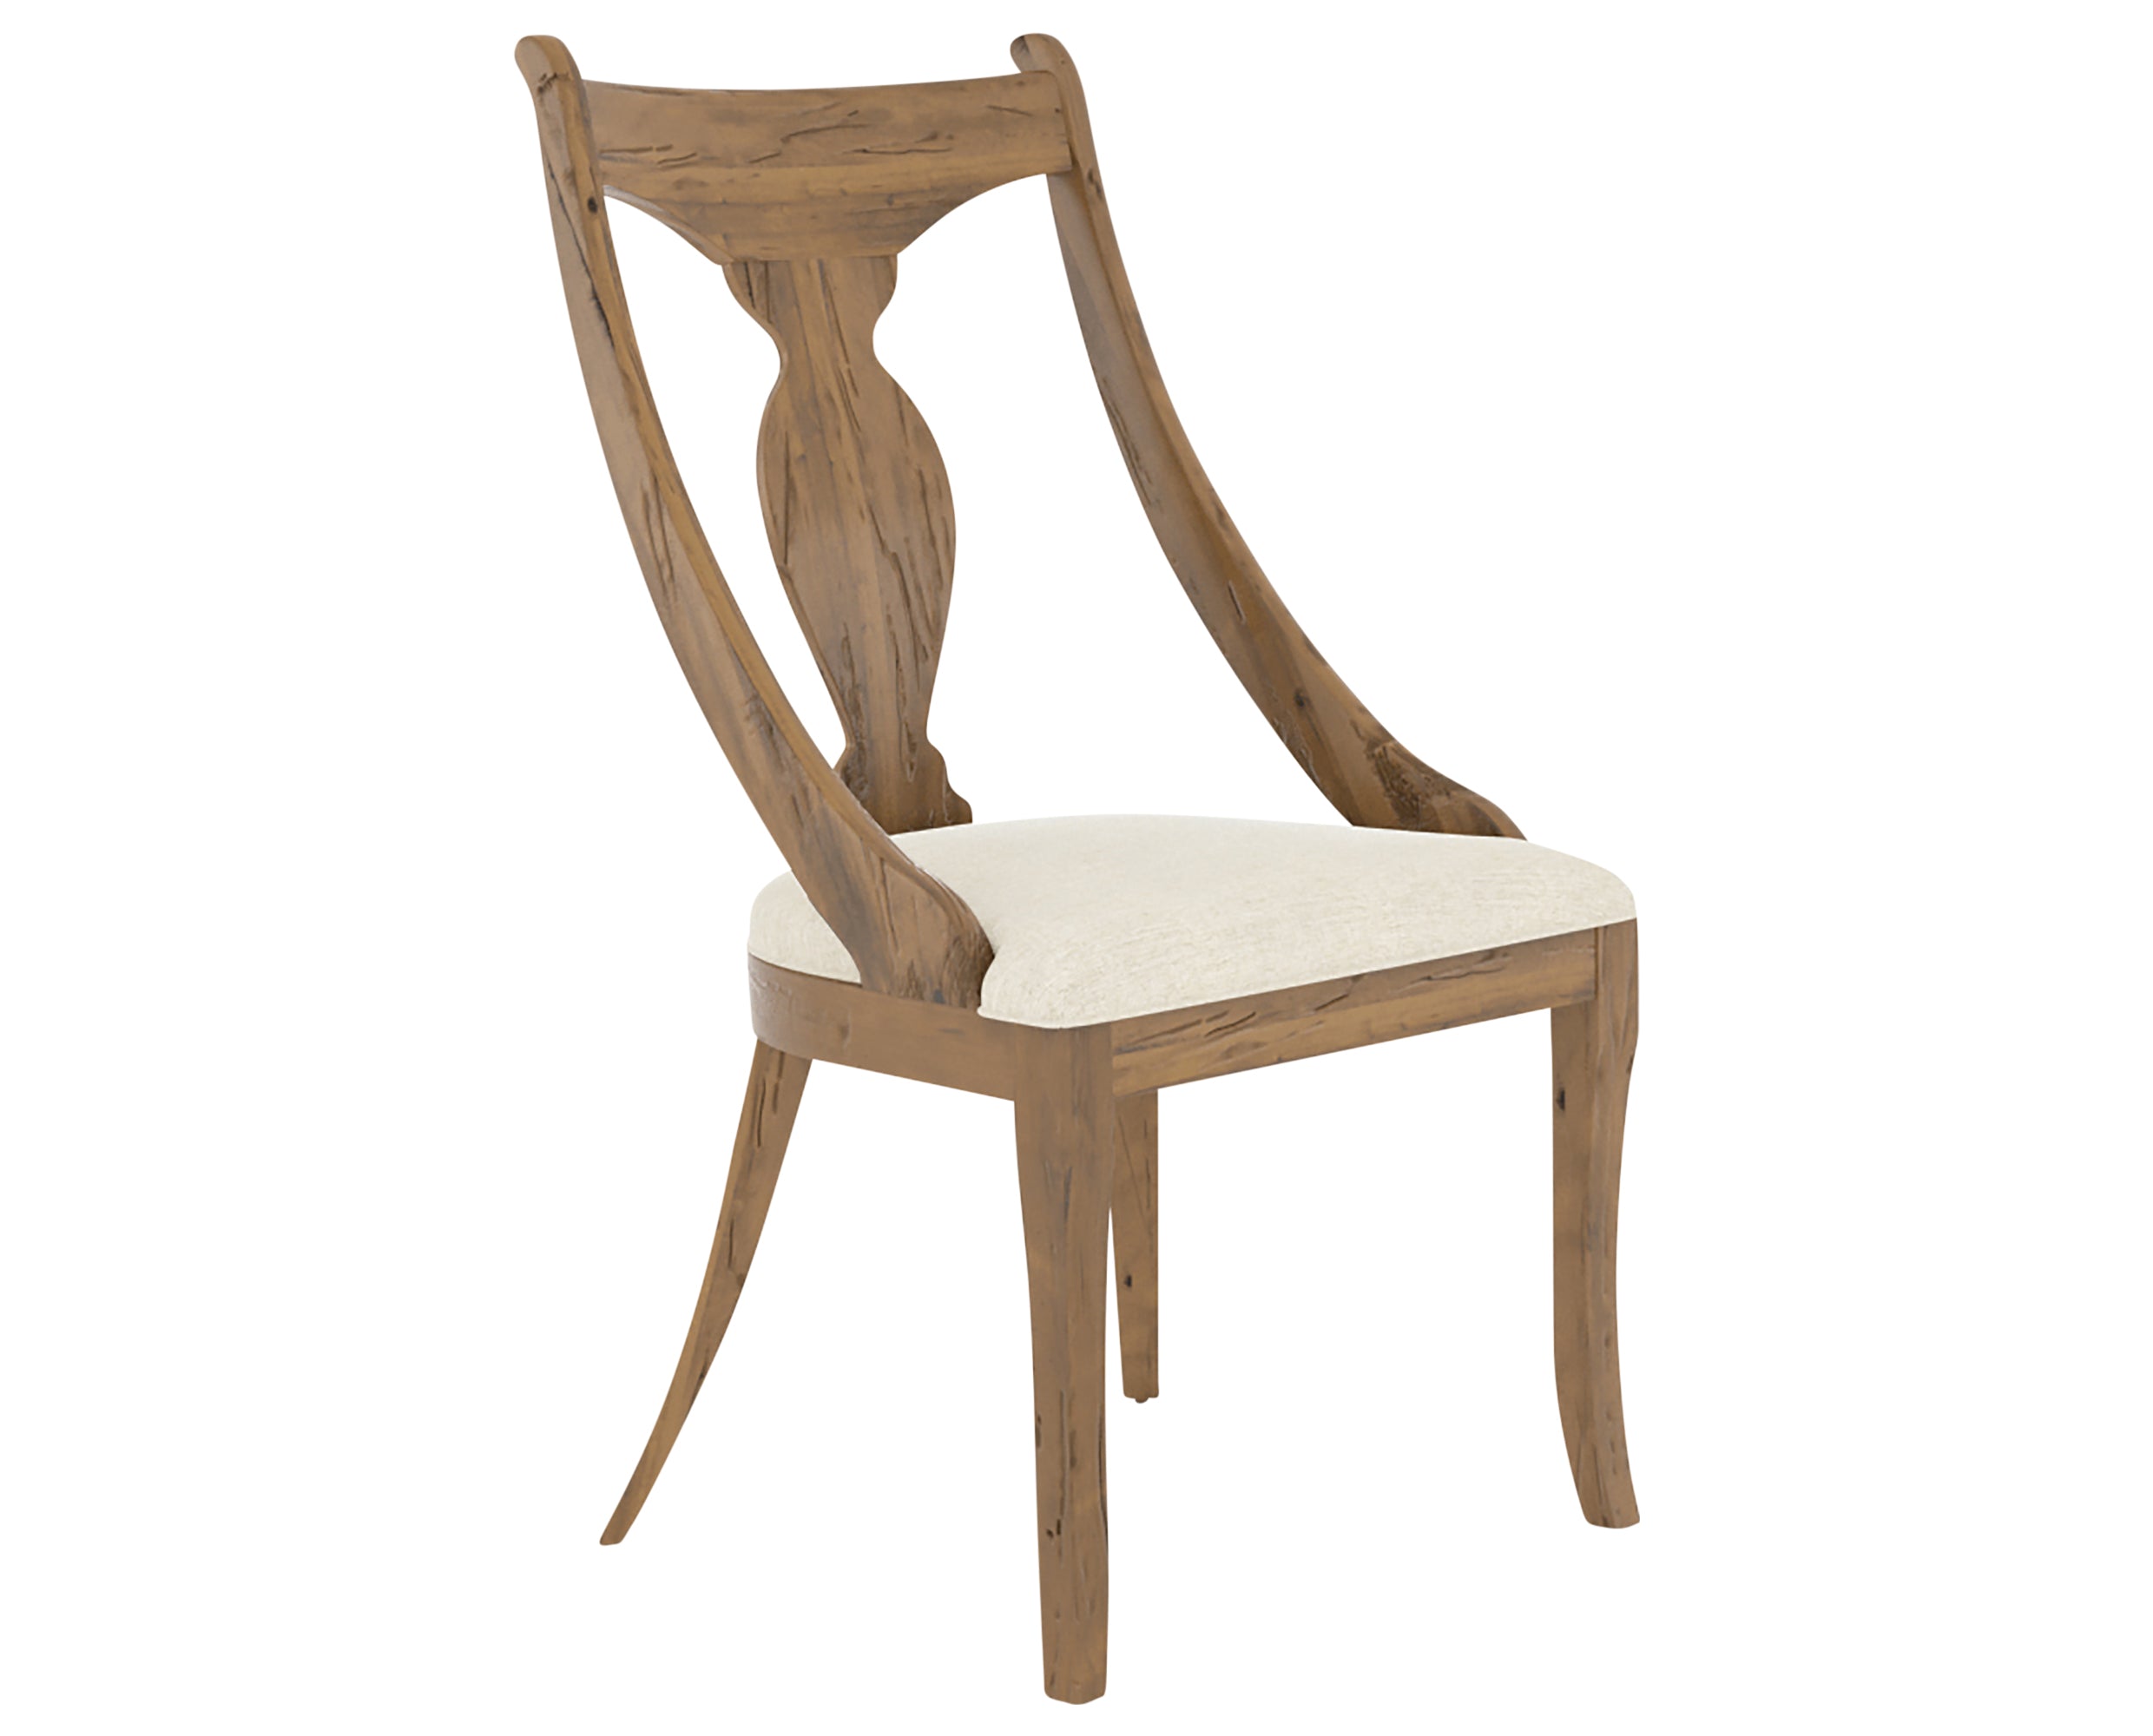 Oak Washed & Fabric TW | Canadel Champlain Dining Chair 5161 | Valley Ridge Furniture